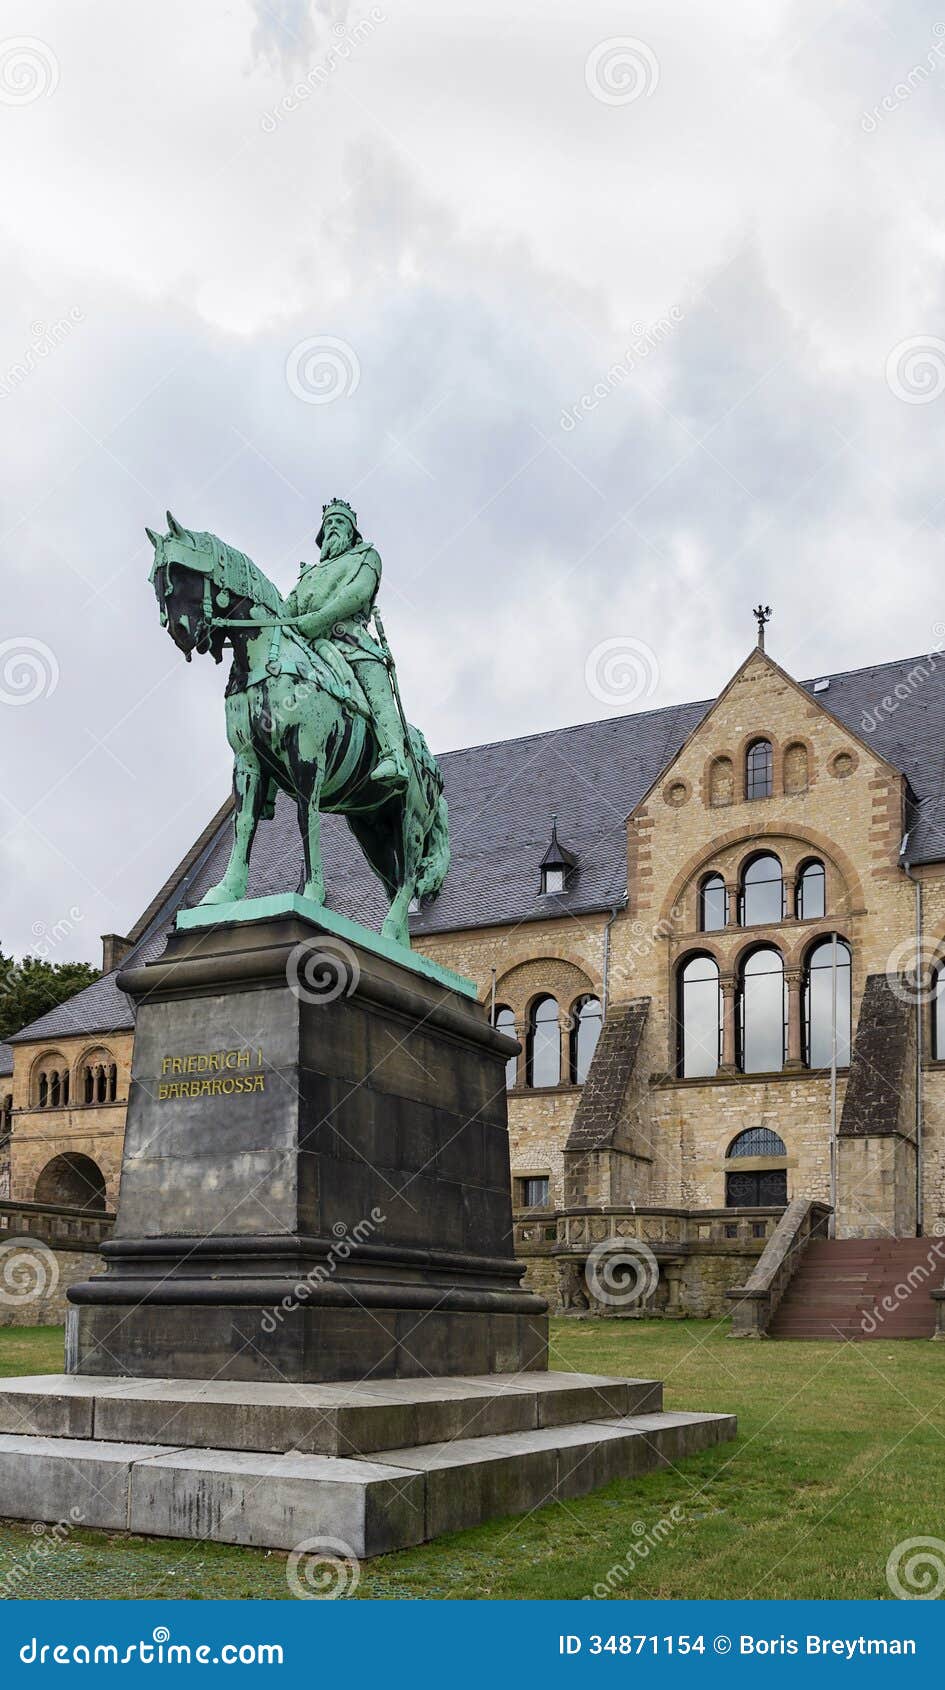 sculpture about the palace of goslar, germany